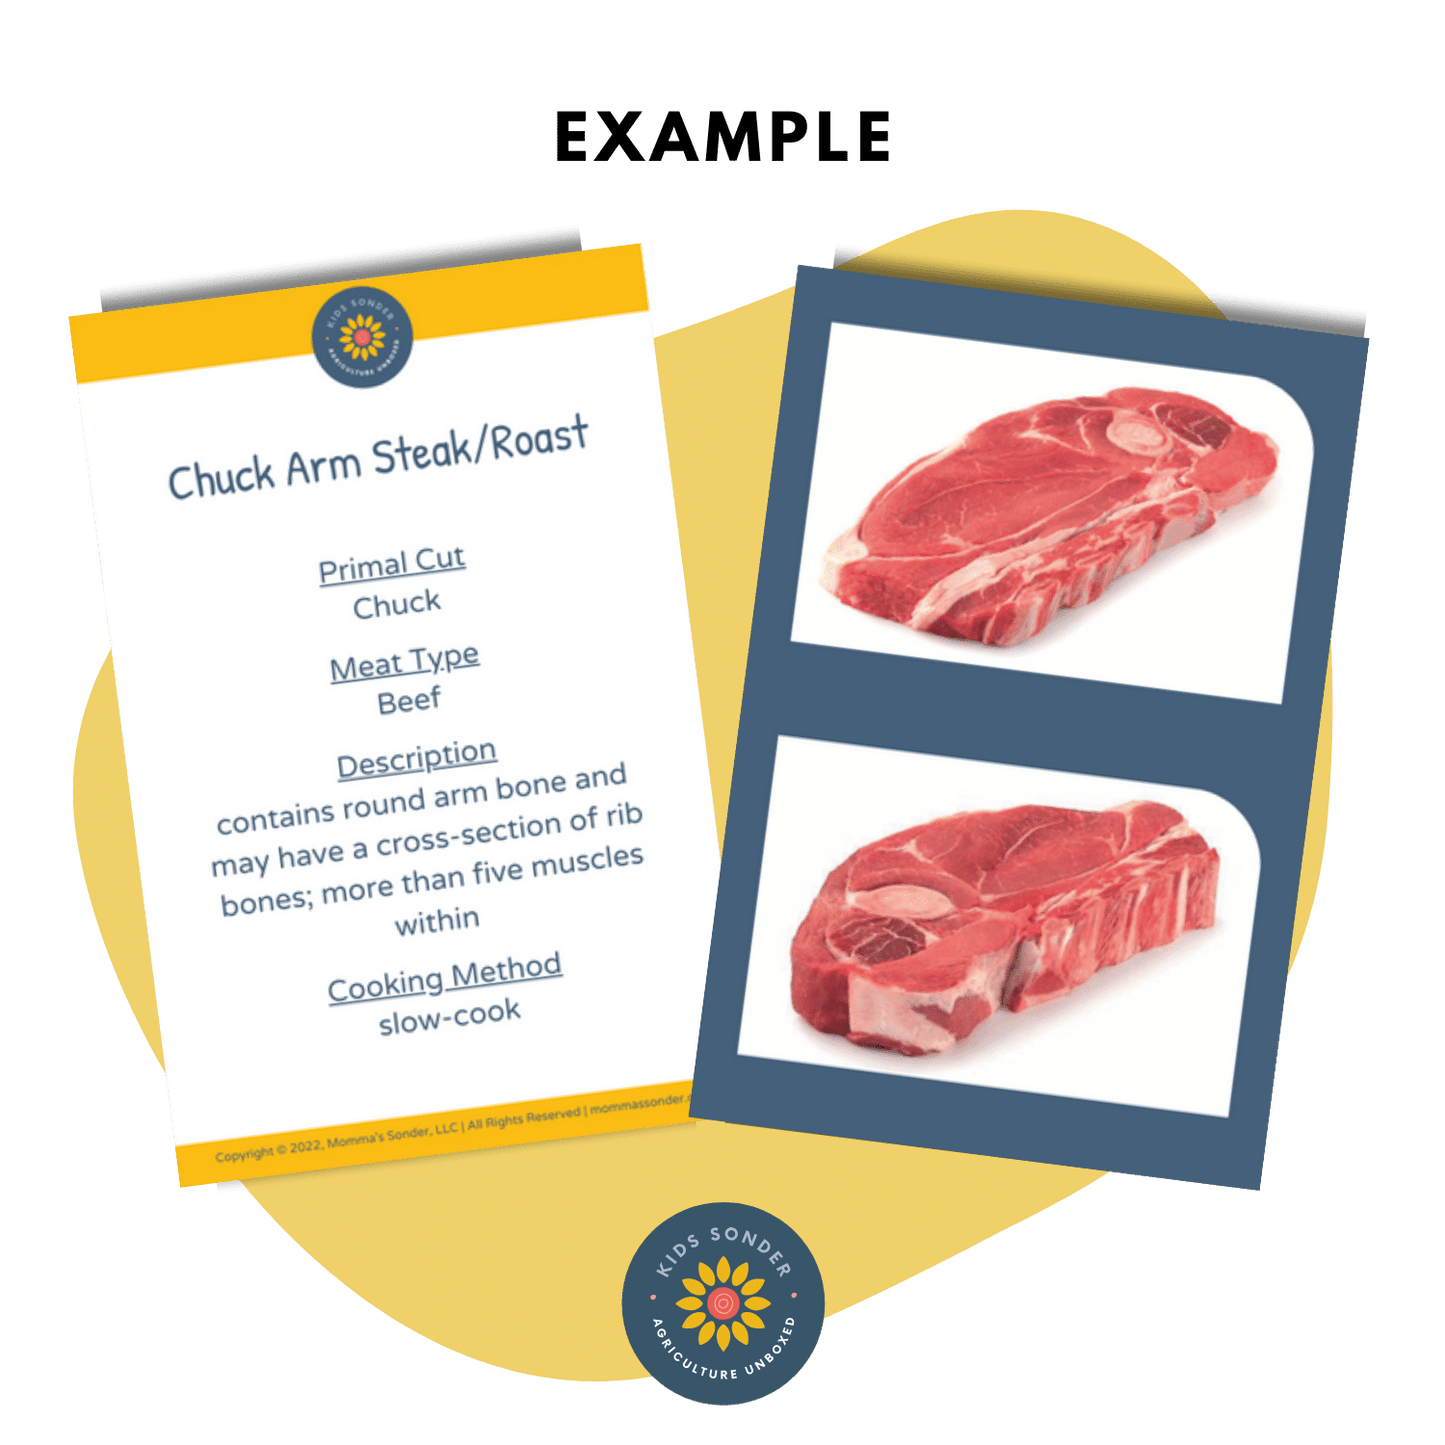 Meat Science: Wholesale/Retail Beef Meat Cut Identification Flashcards